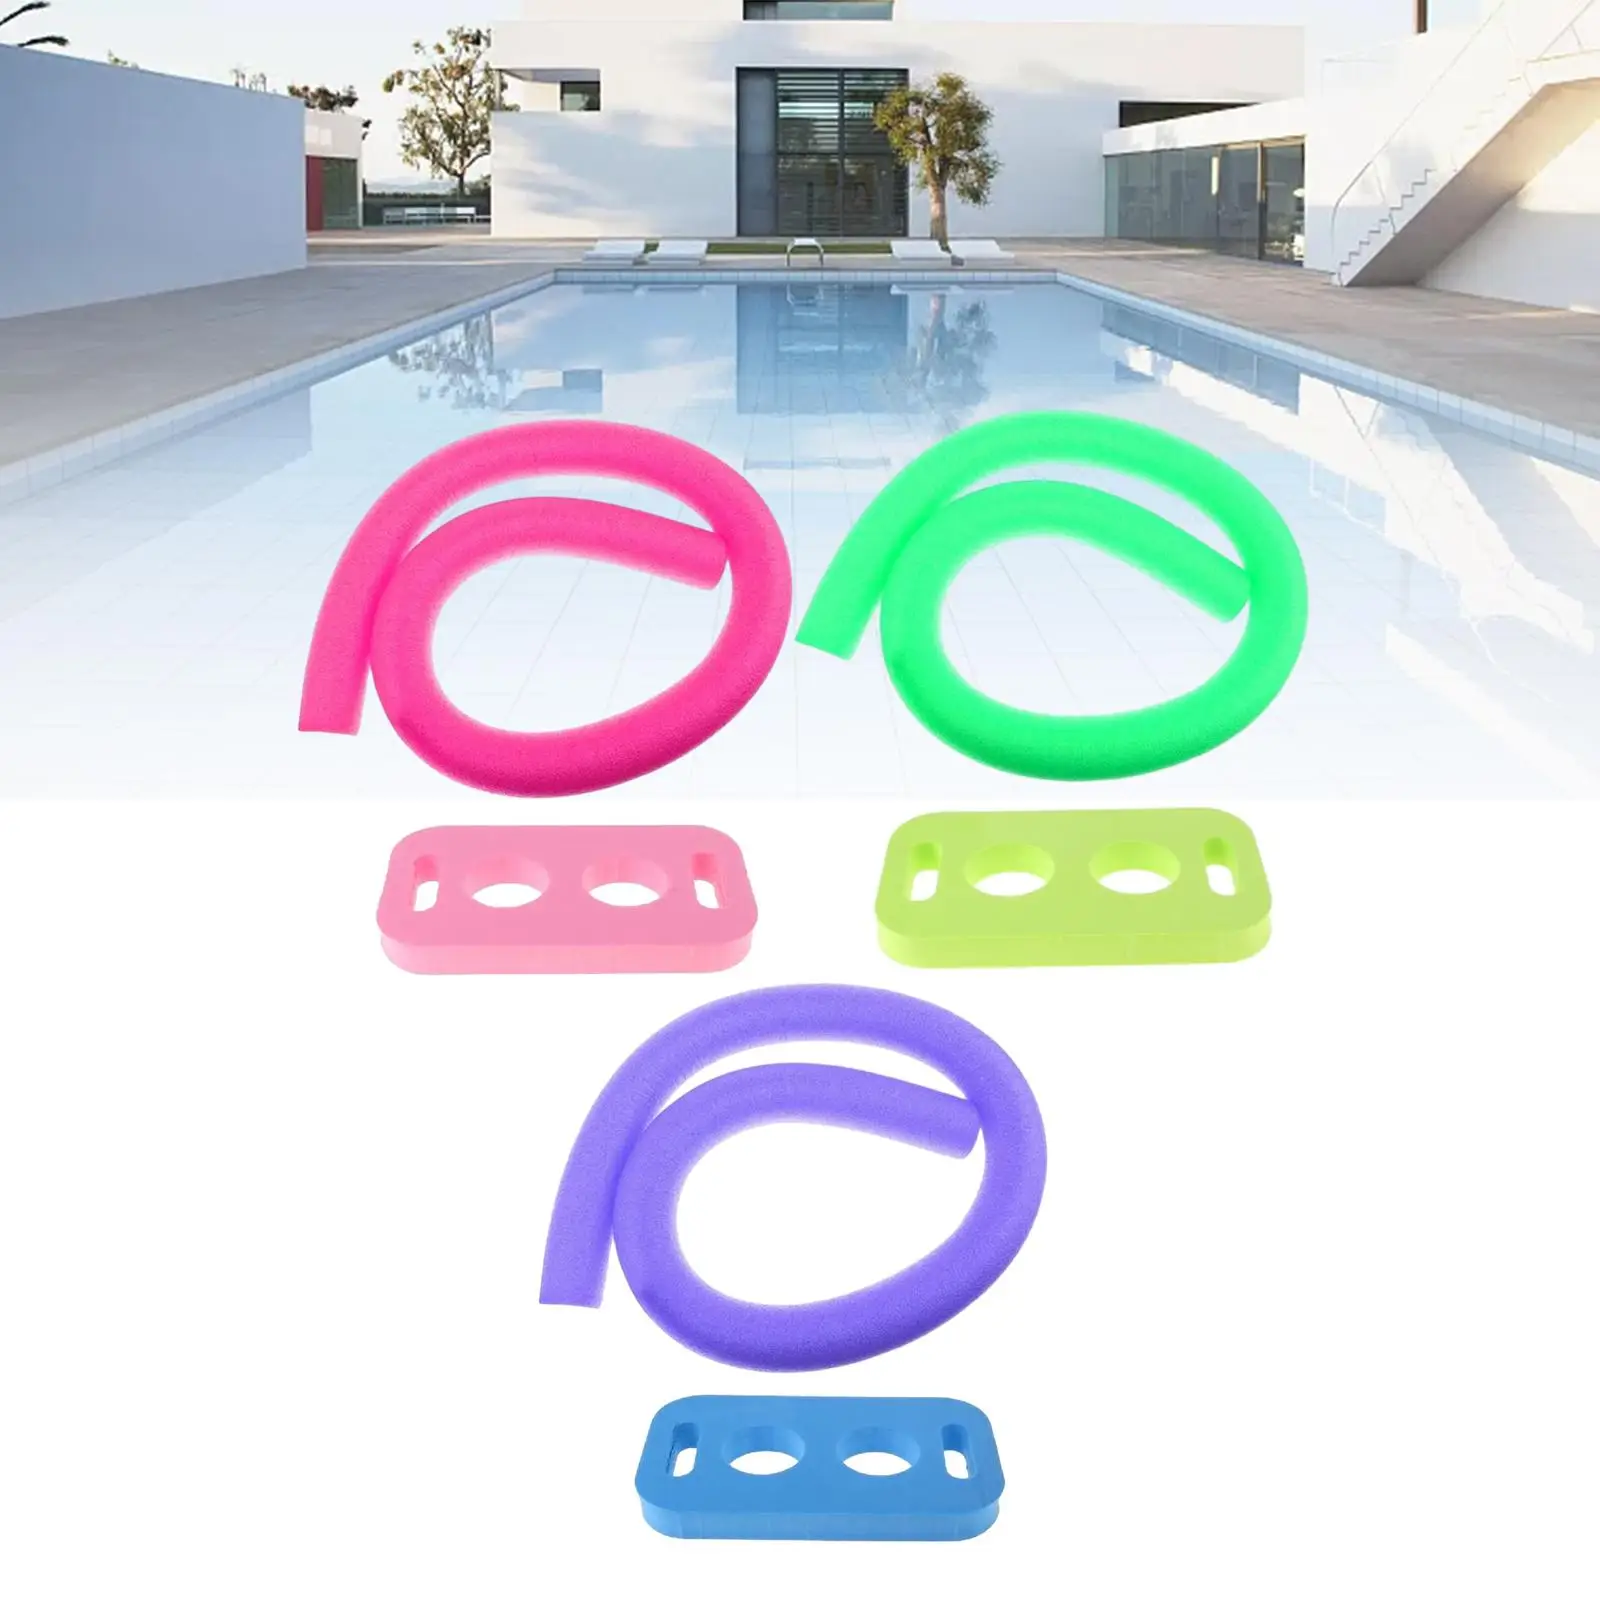 Swimming Pool Noodle 59in Pool Swim Noodles Foam Noodle Floating Pool Noodles Round Foam Tube for Outdoor Pool Accessories